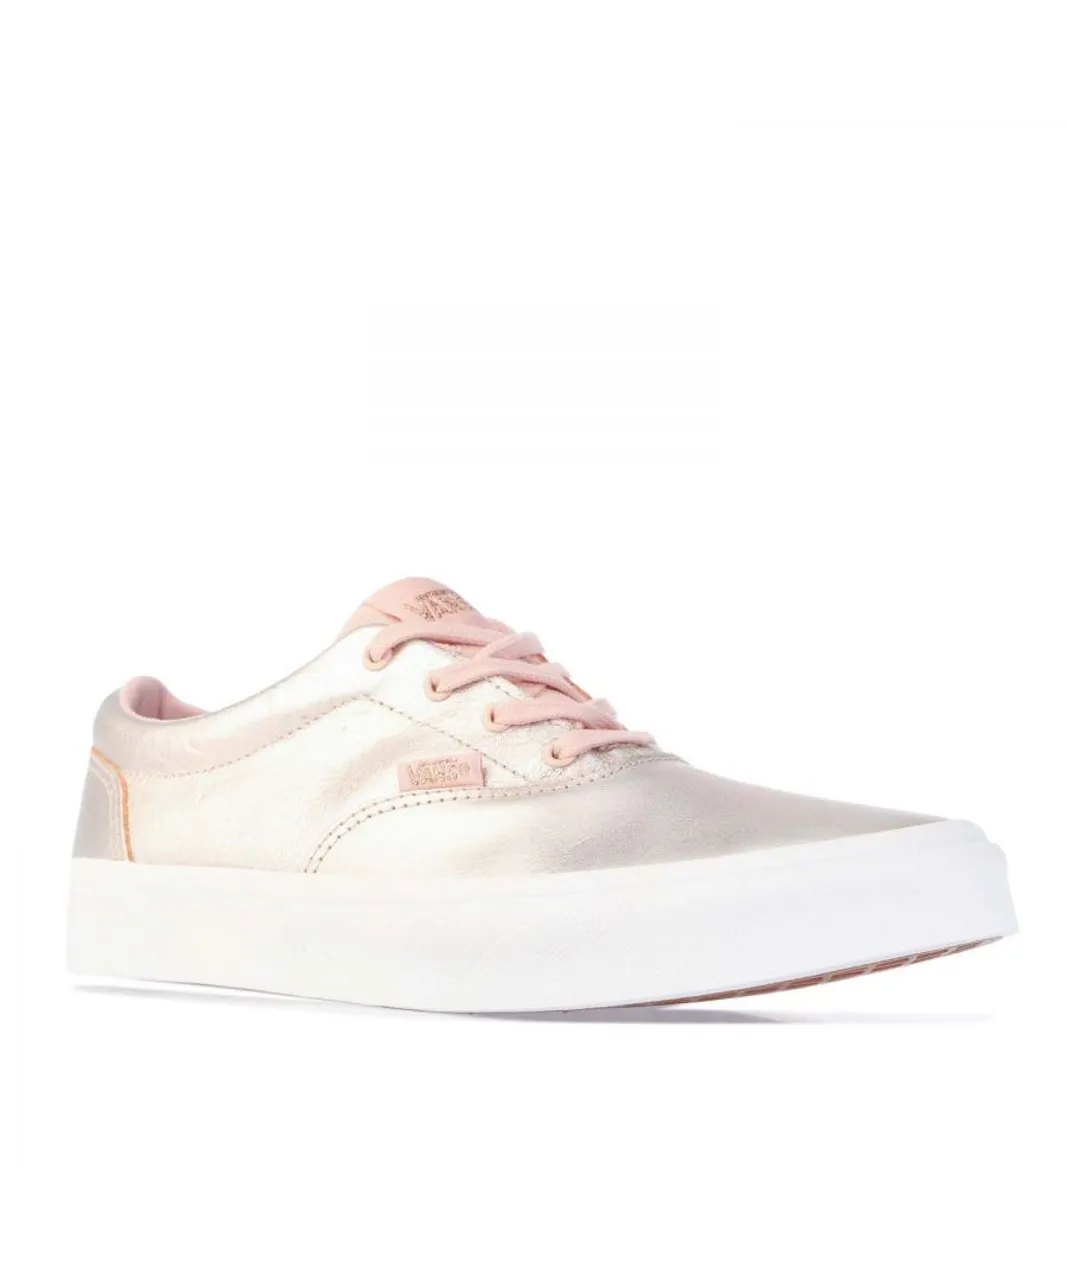 Vans Girls Girl's Junior Doheny Trainers in Rose Gold Canvas